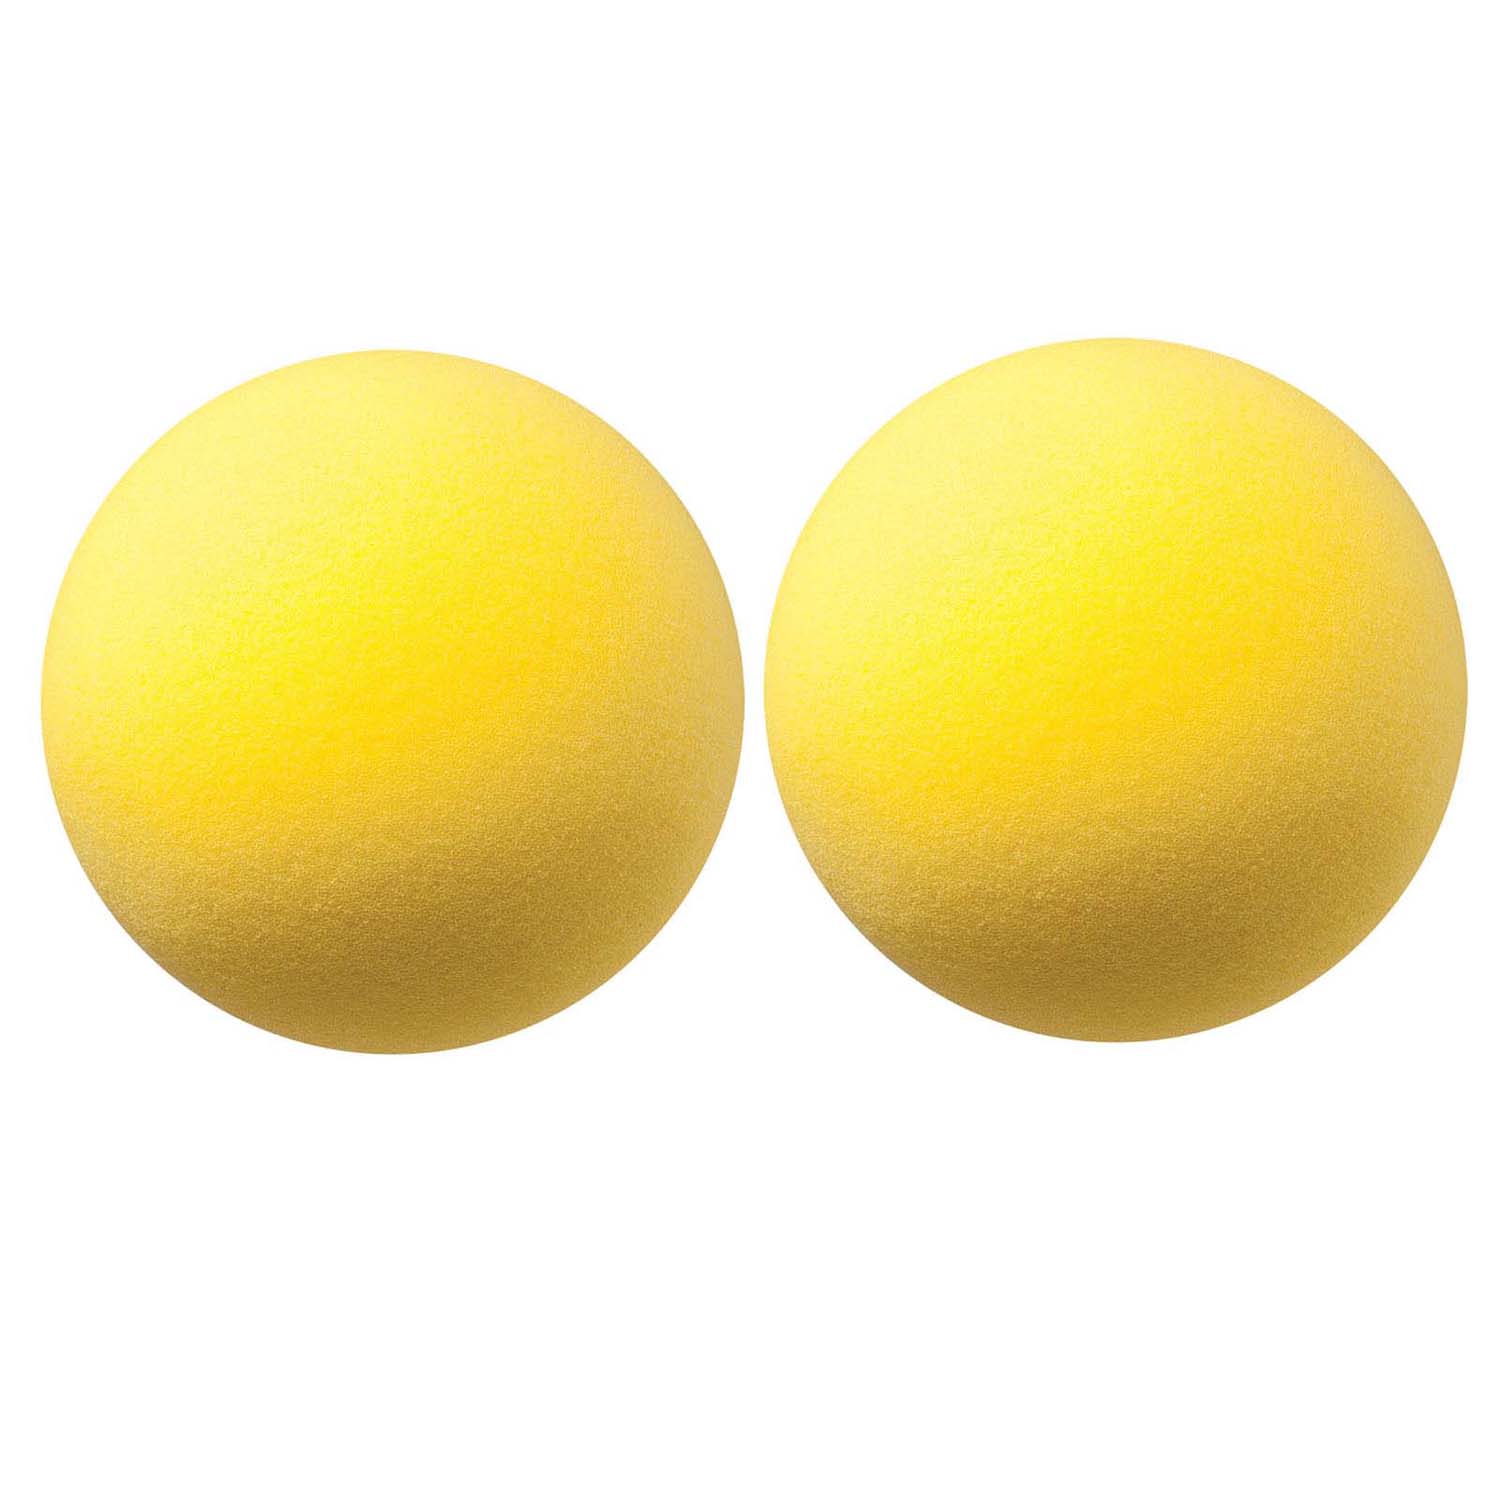 Uncoated Regular Density Foam Ball, 8-1/2", Yellow, Pack of 2